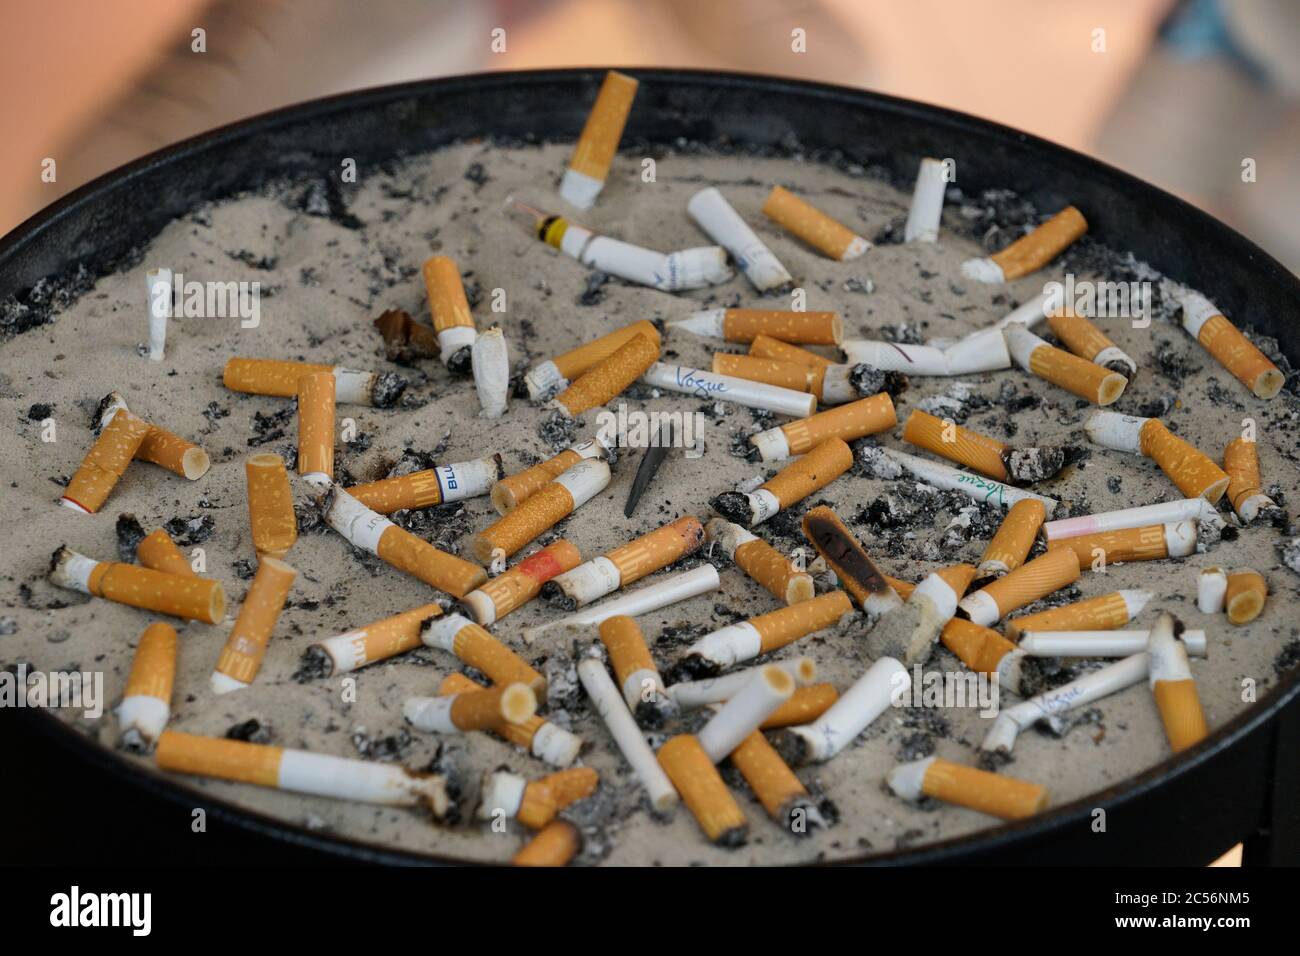 Large ashtray, cigarette butts, expressed, outside Stock Photo